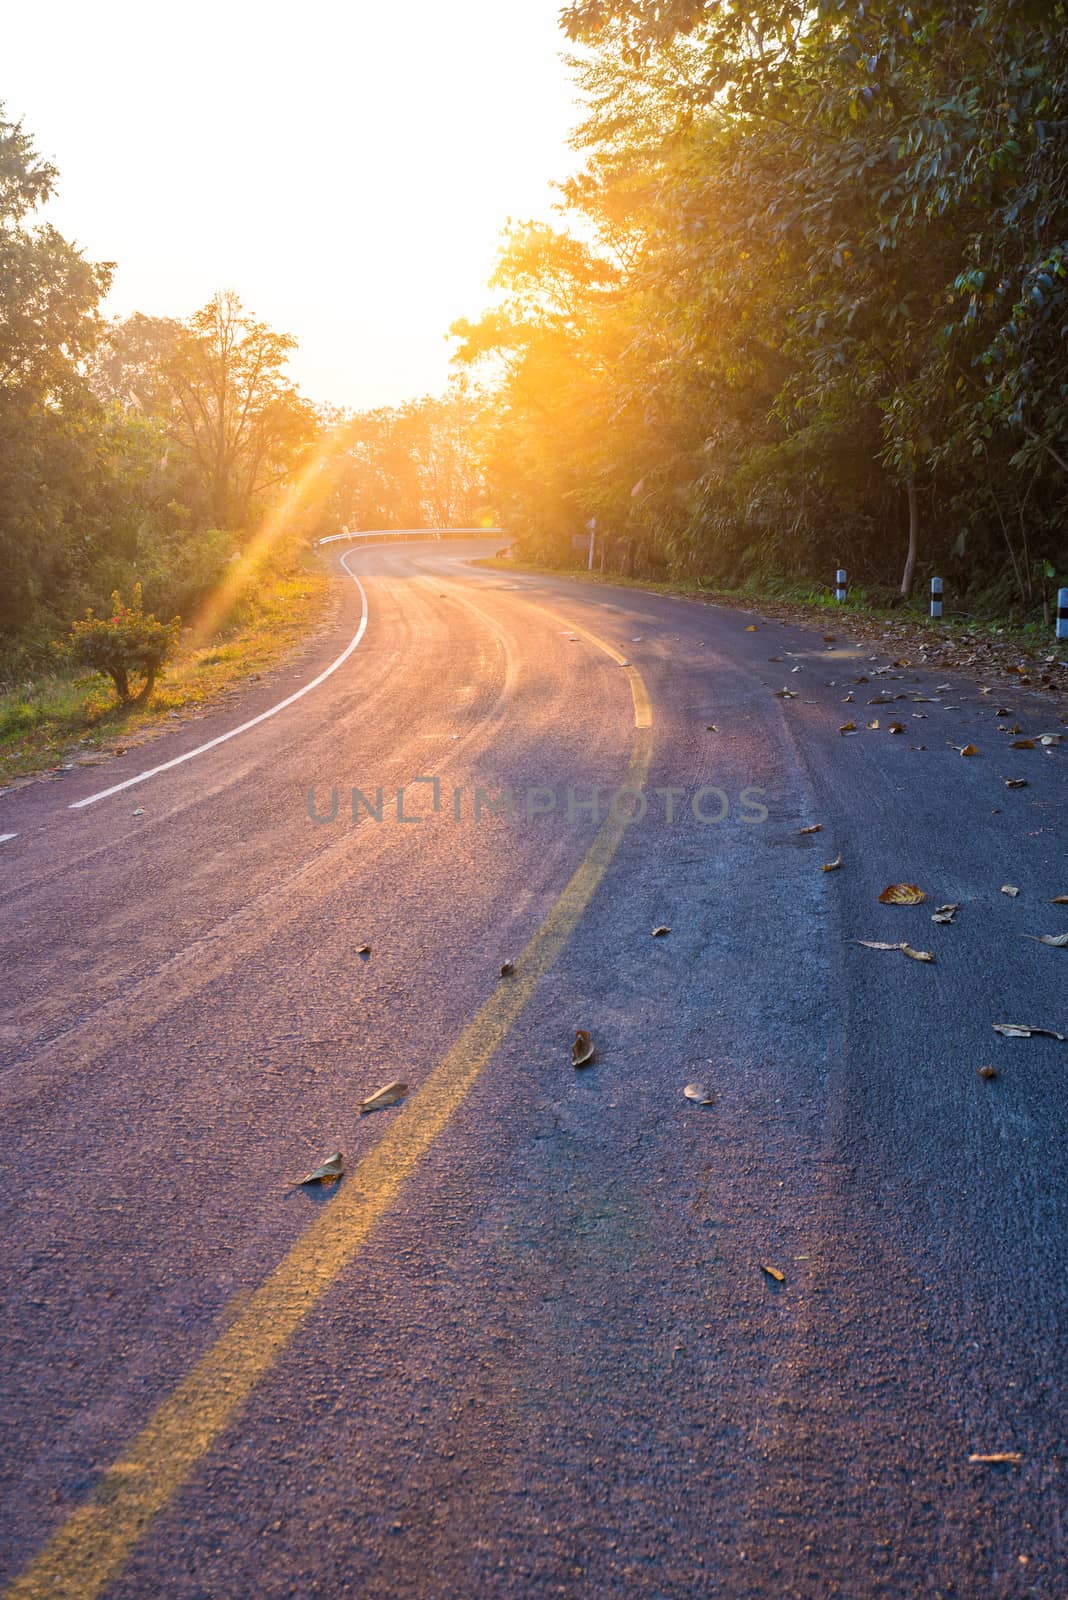 road with yellow line and sun by moggara12